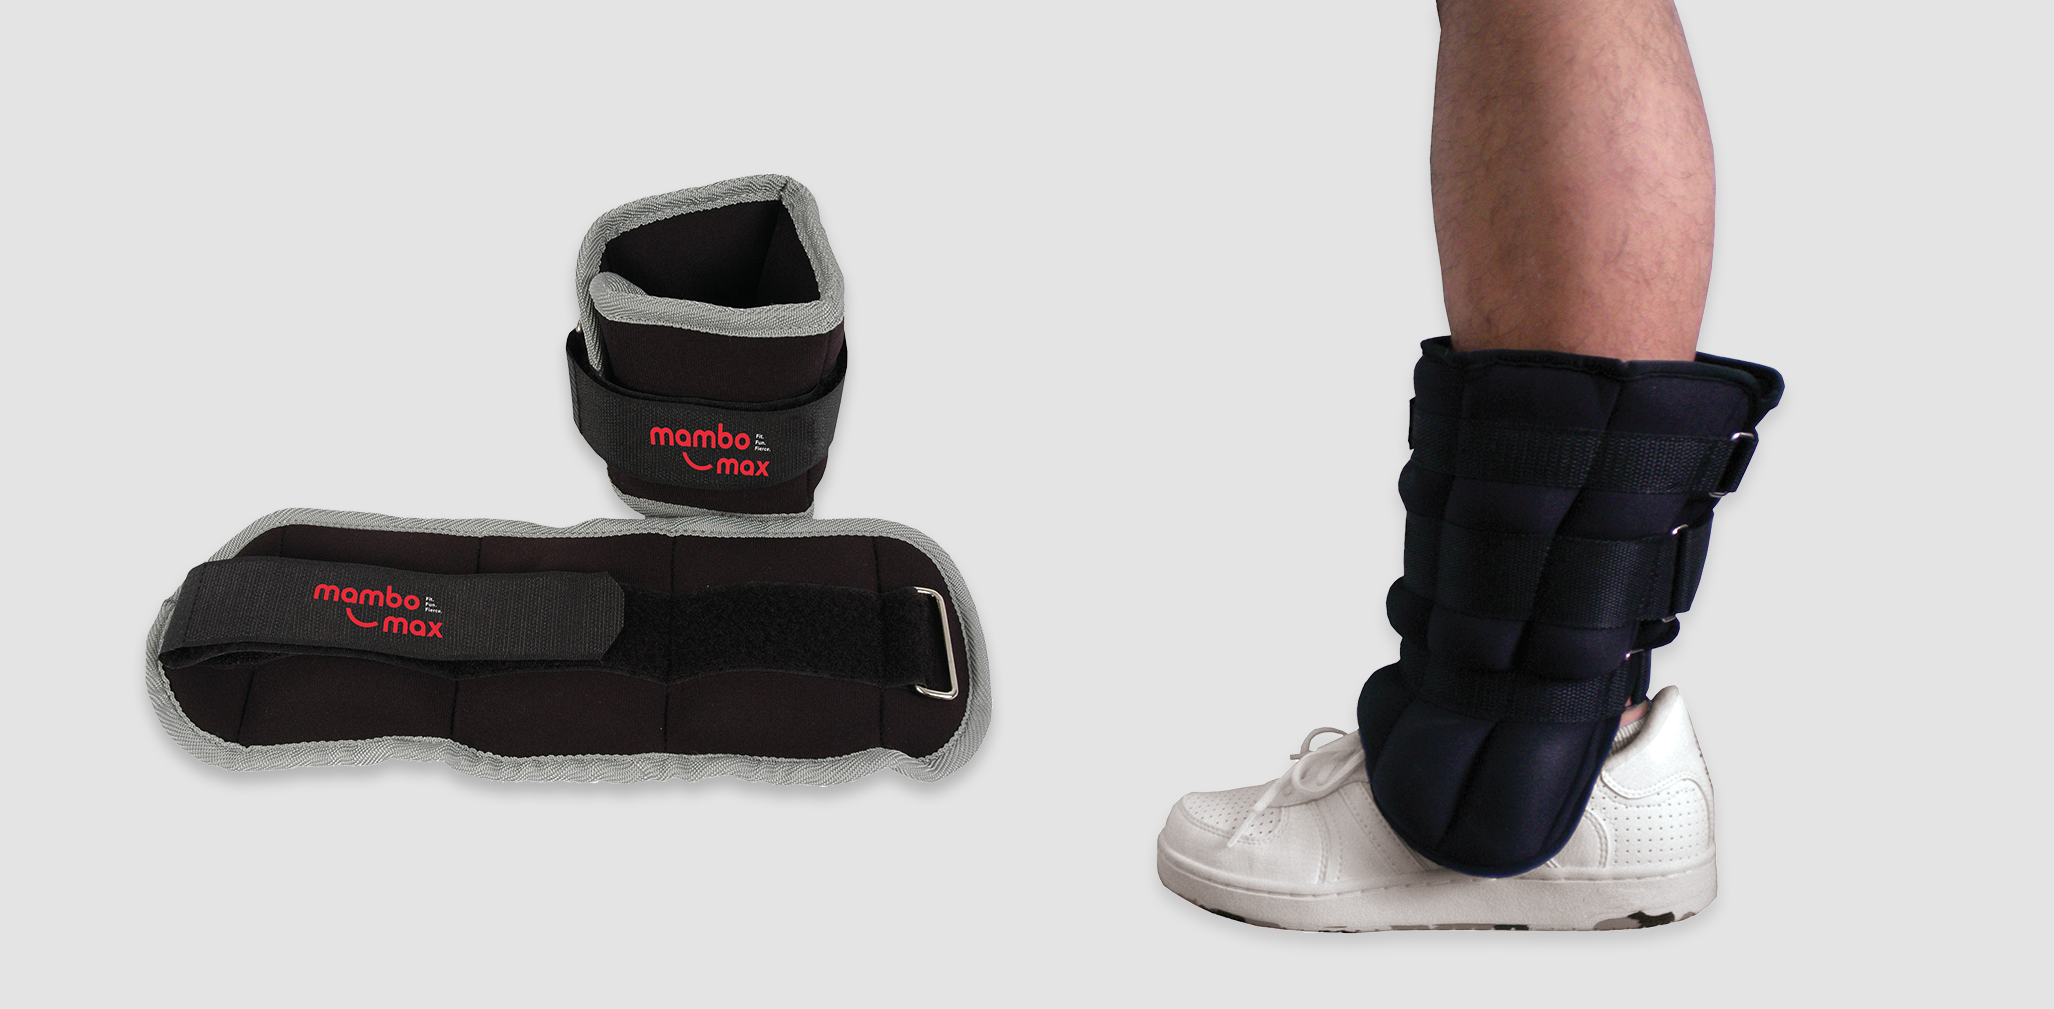 Wrist & ankle weights